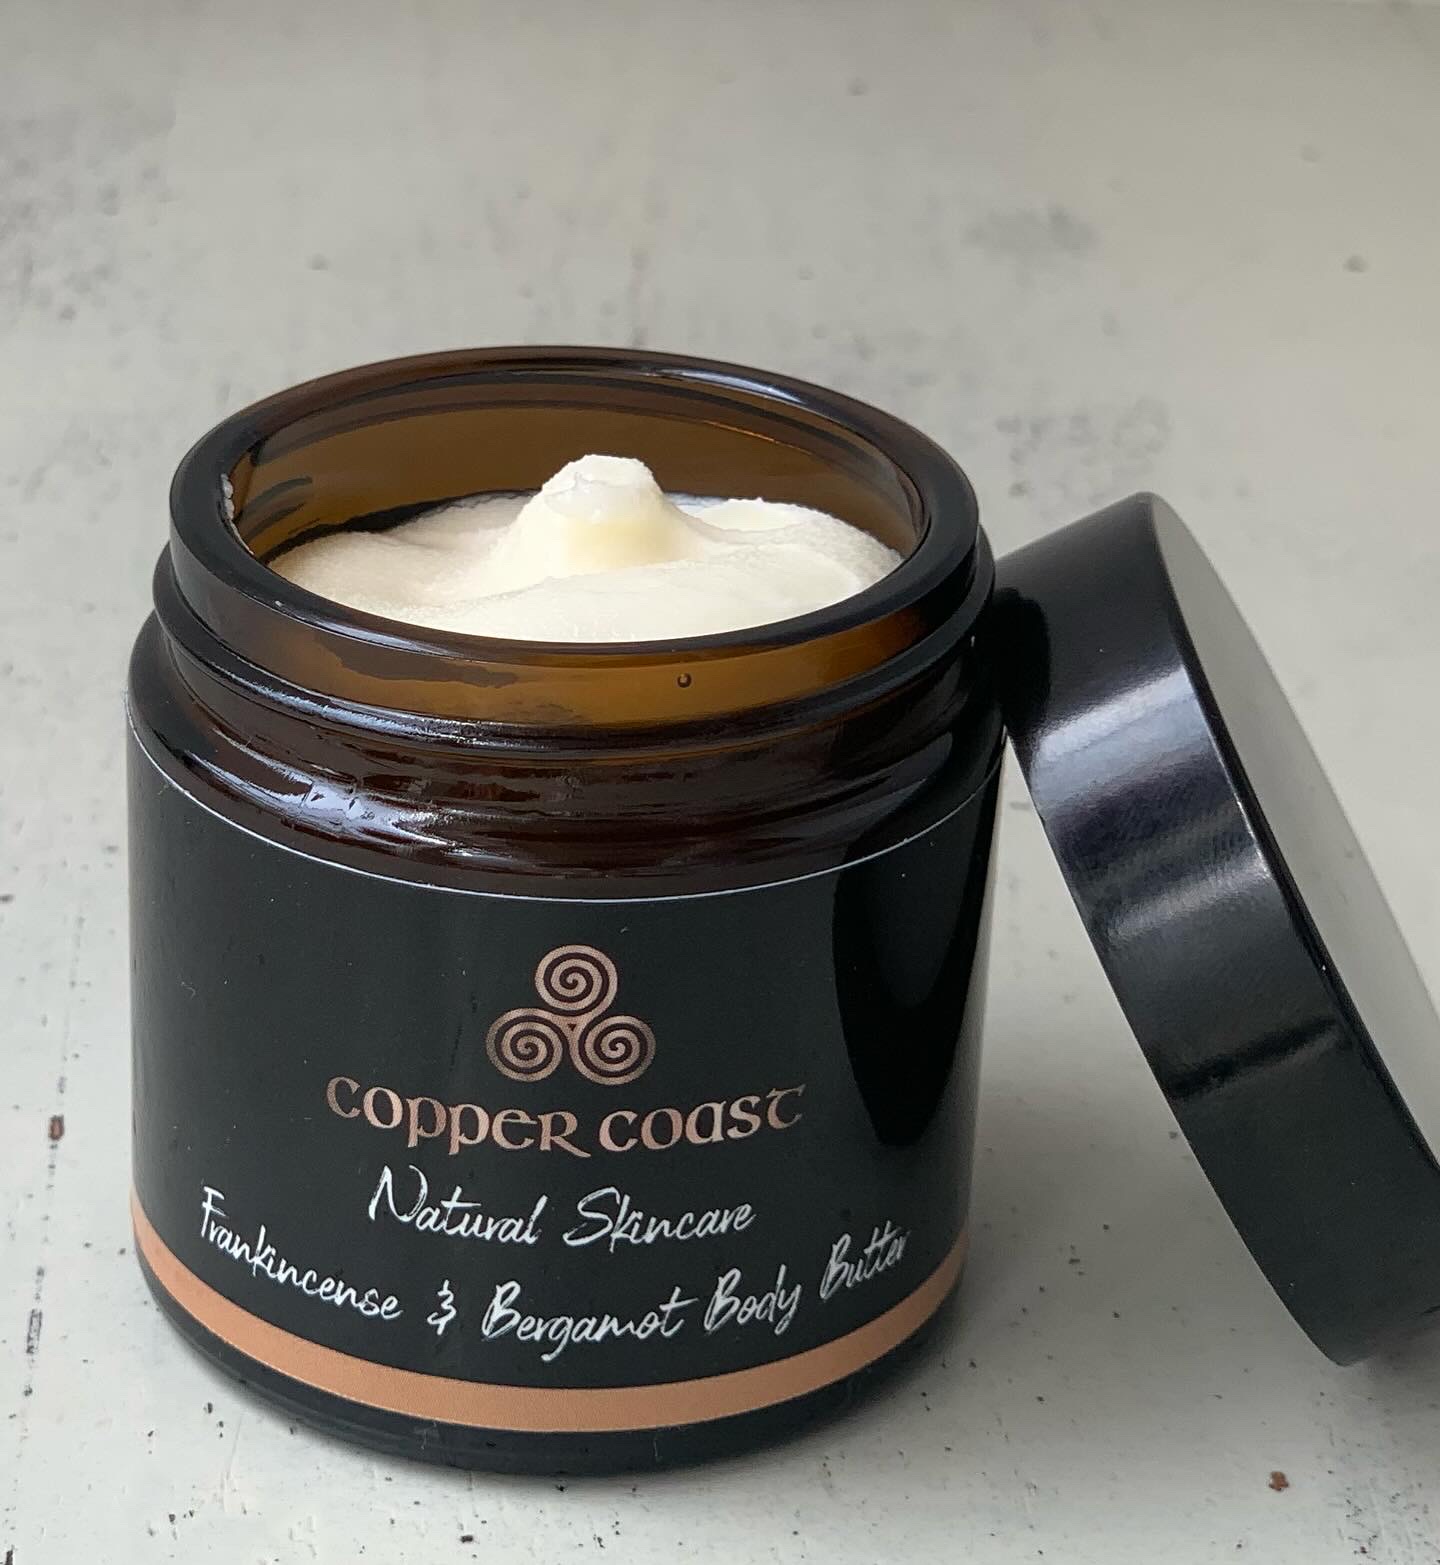 Intensive Whipped Body Butter